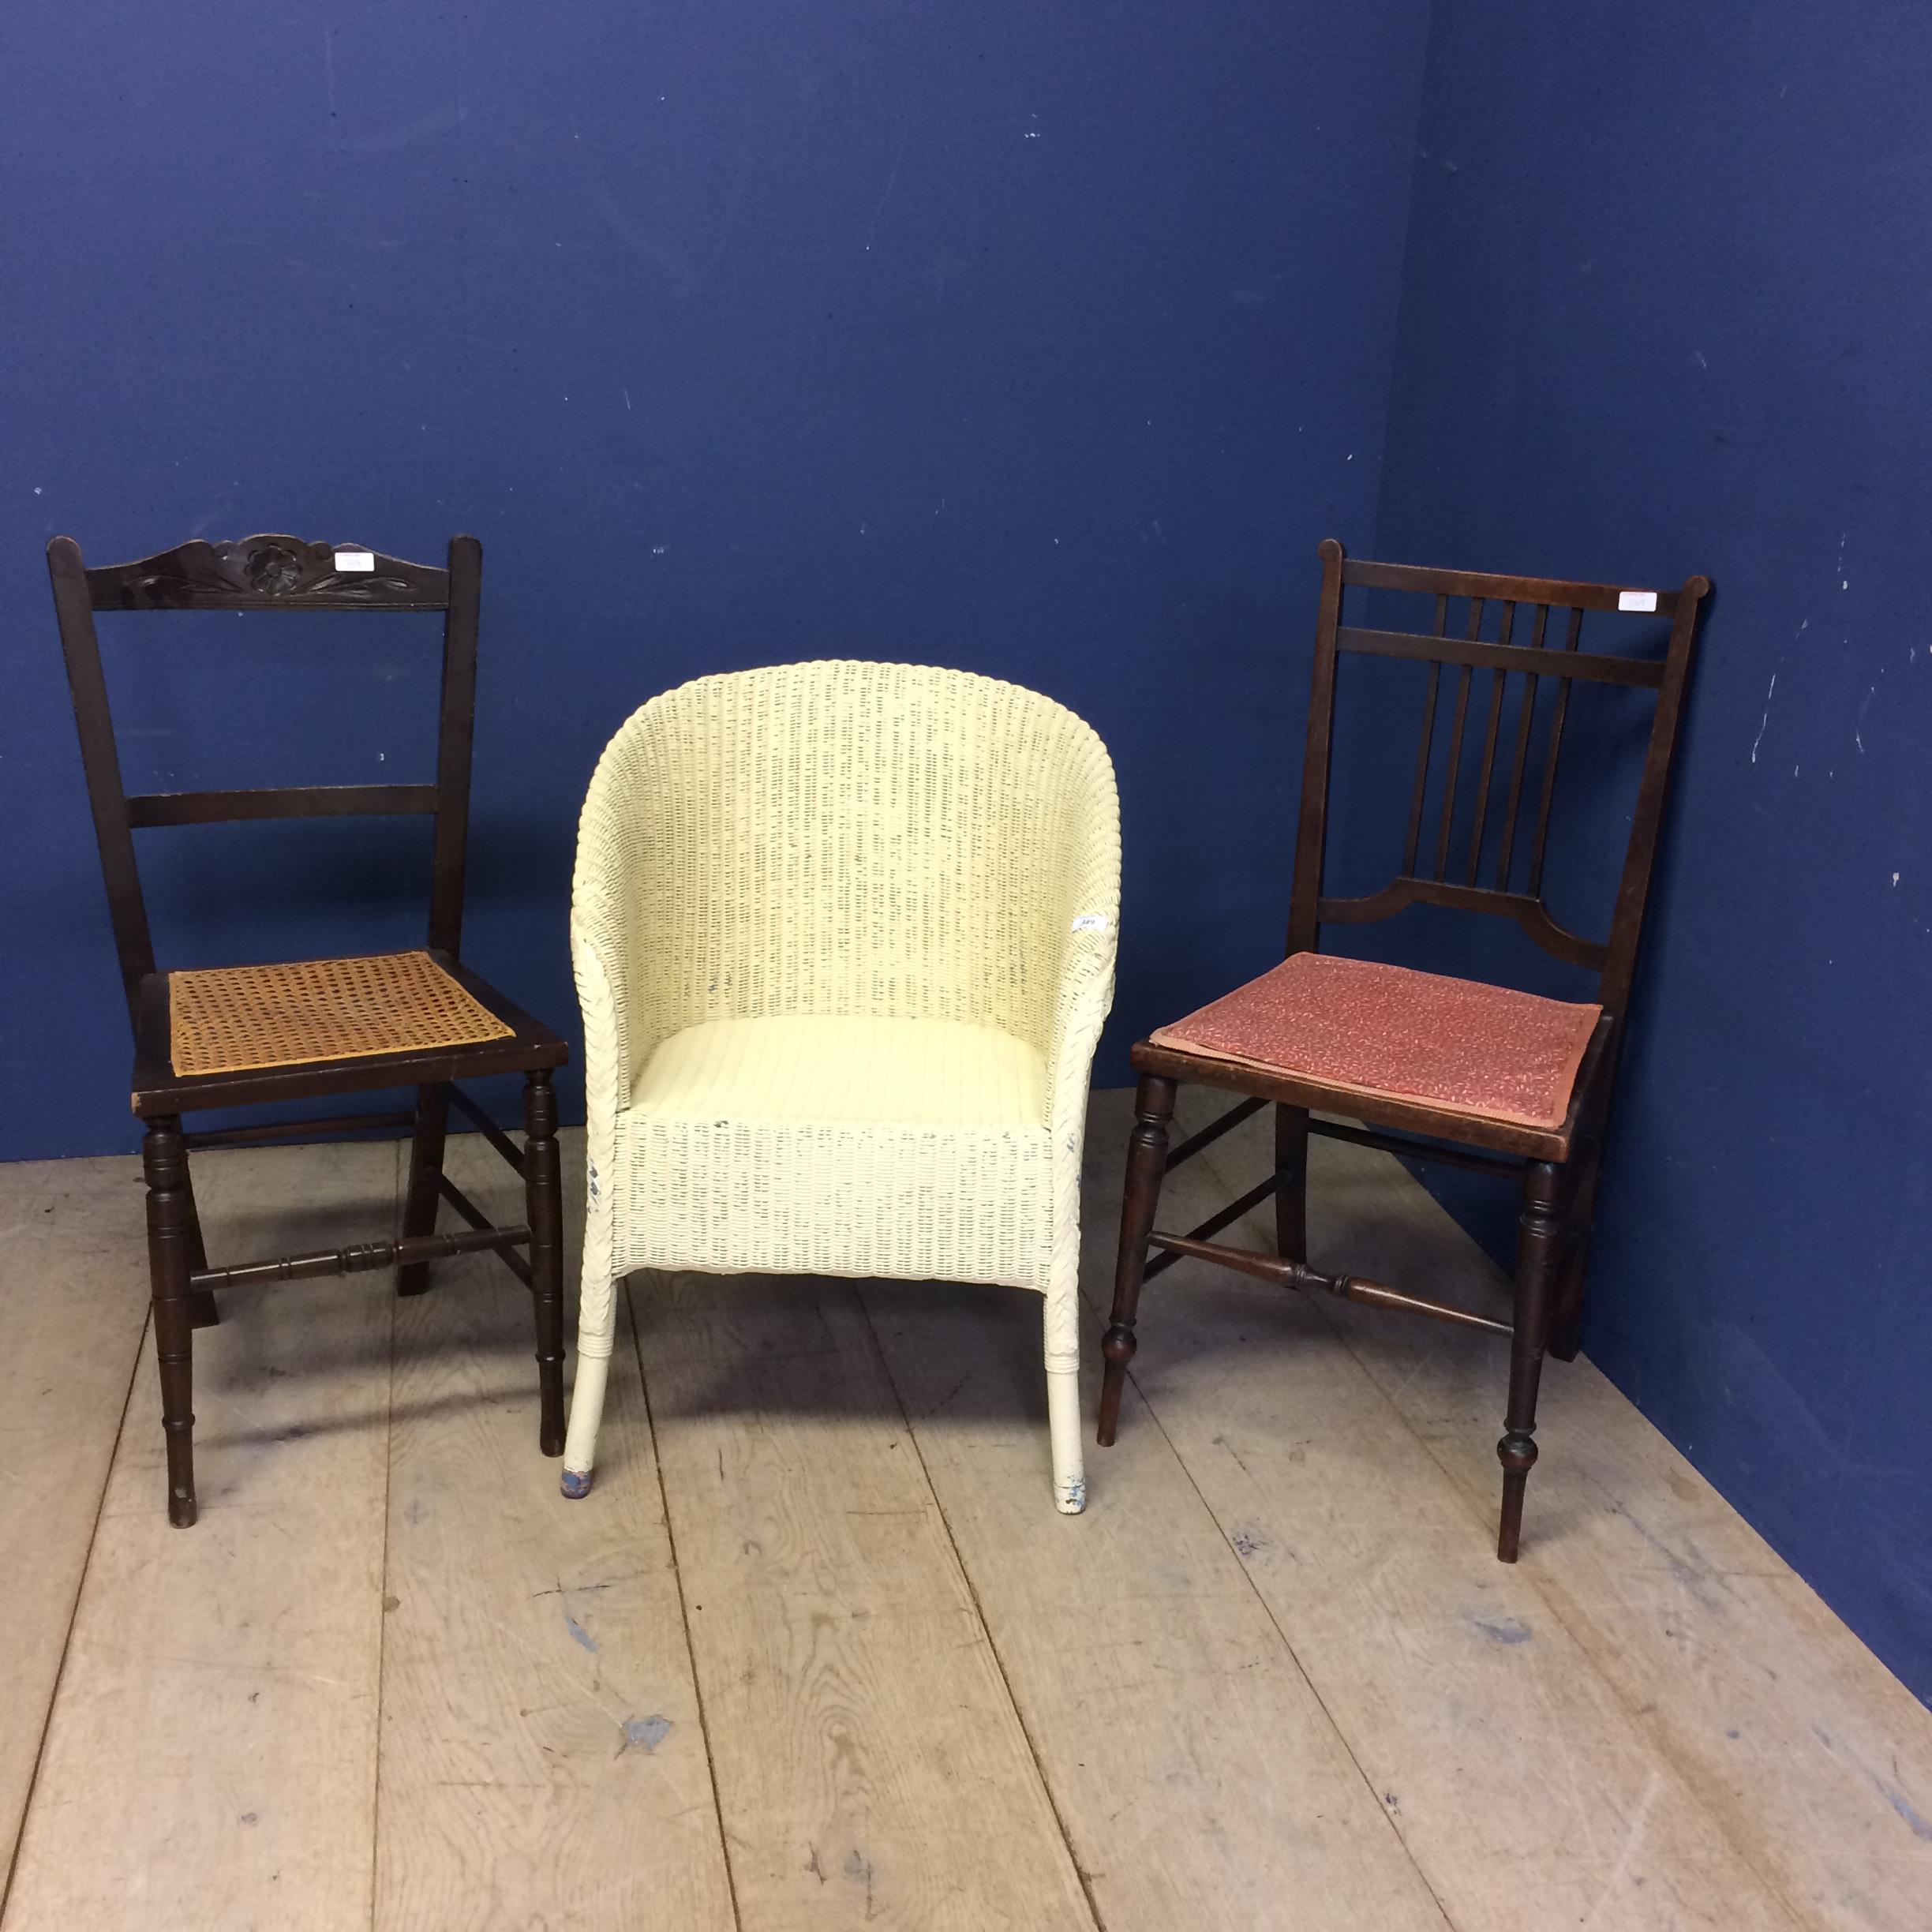 Lloyd loom style cream painted chair, a bergère seat bedroom chair and one another